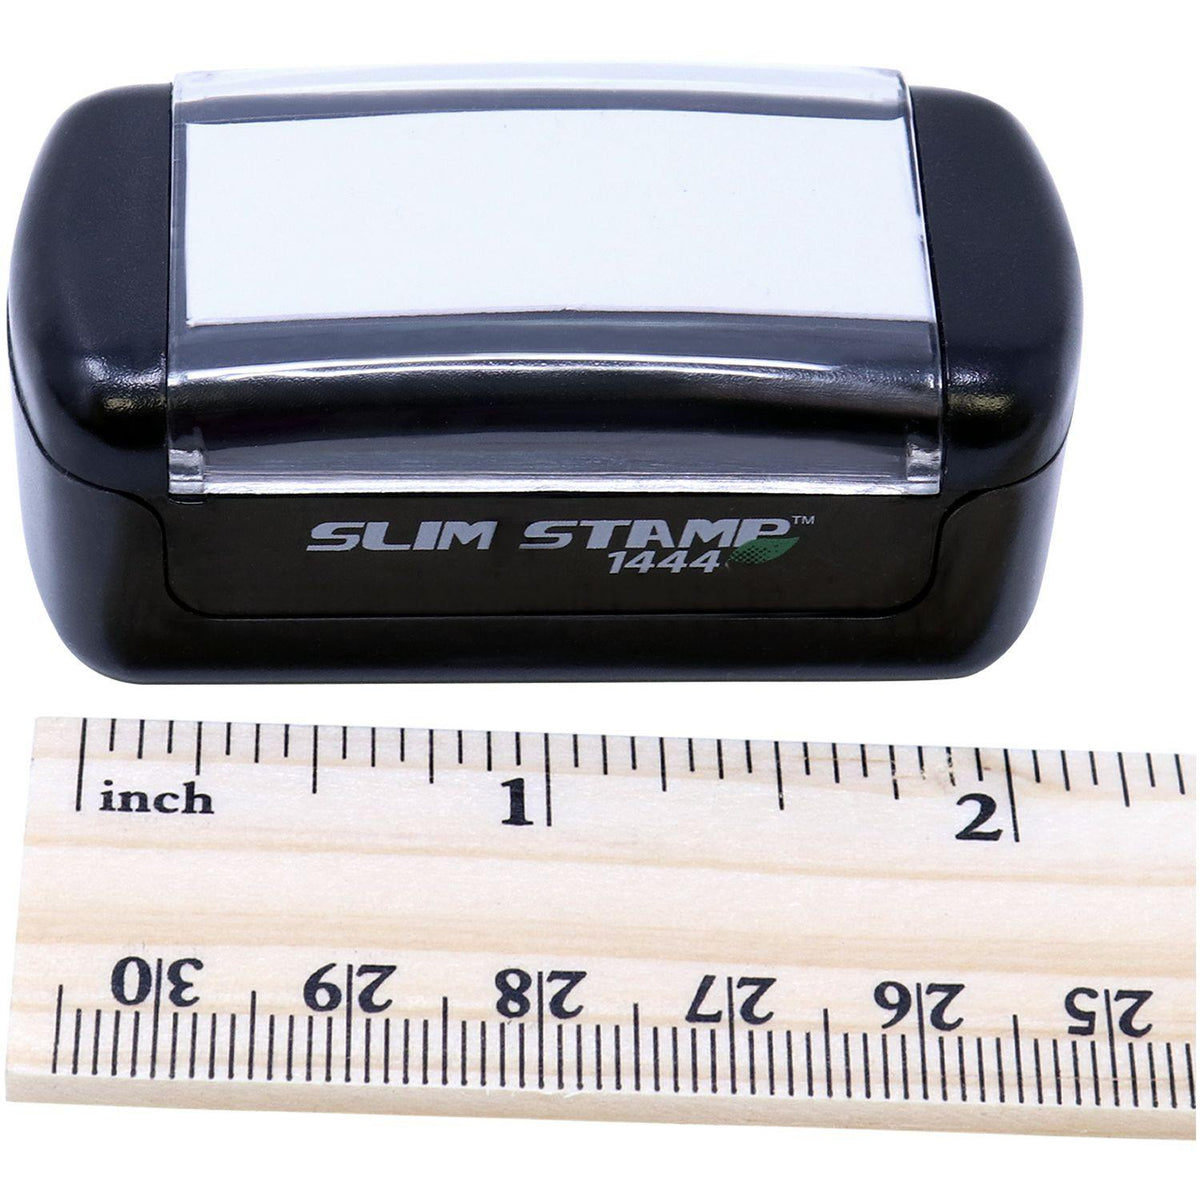 Measurement Slim Pre-Inked Confirmation of Phone Order Stamp with Ruler